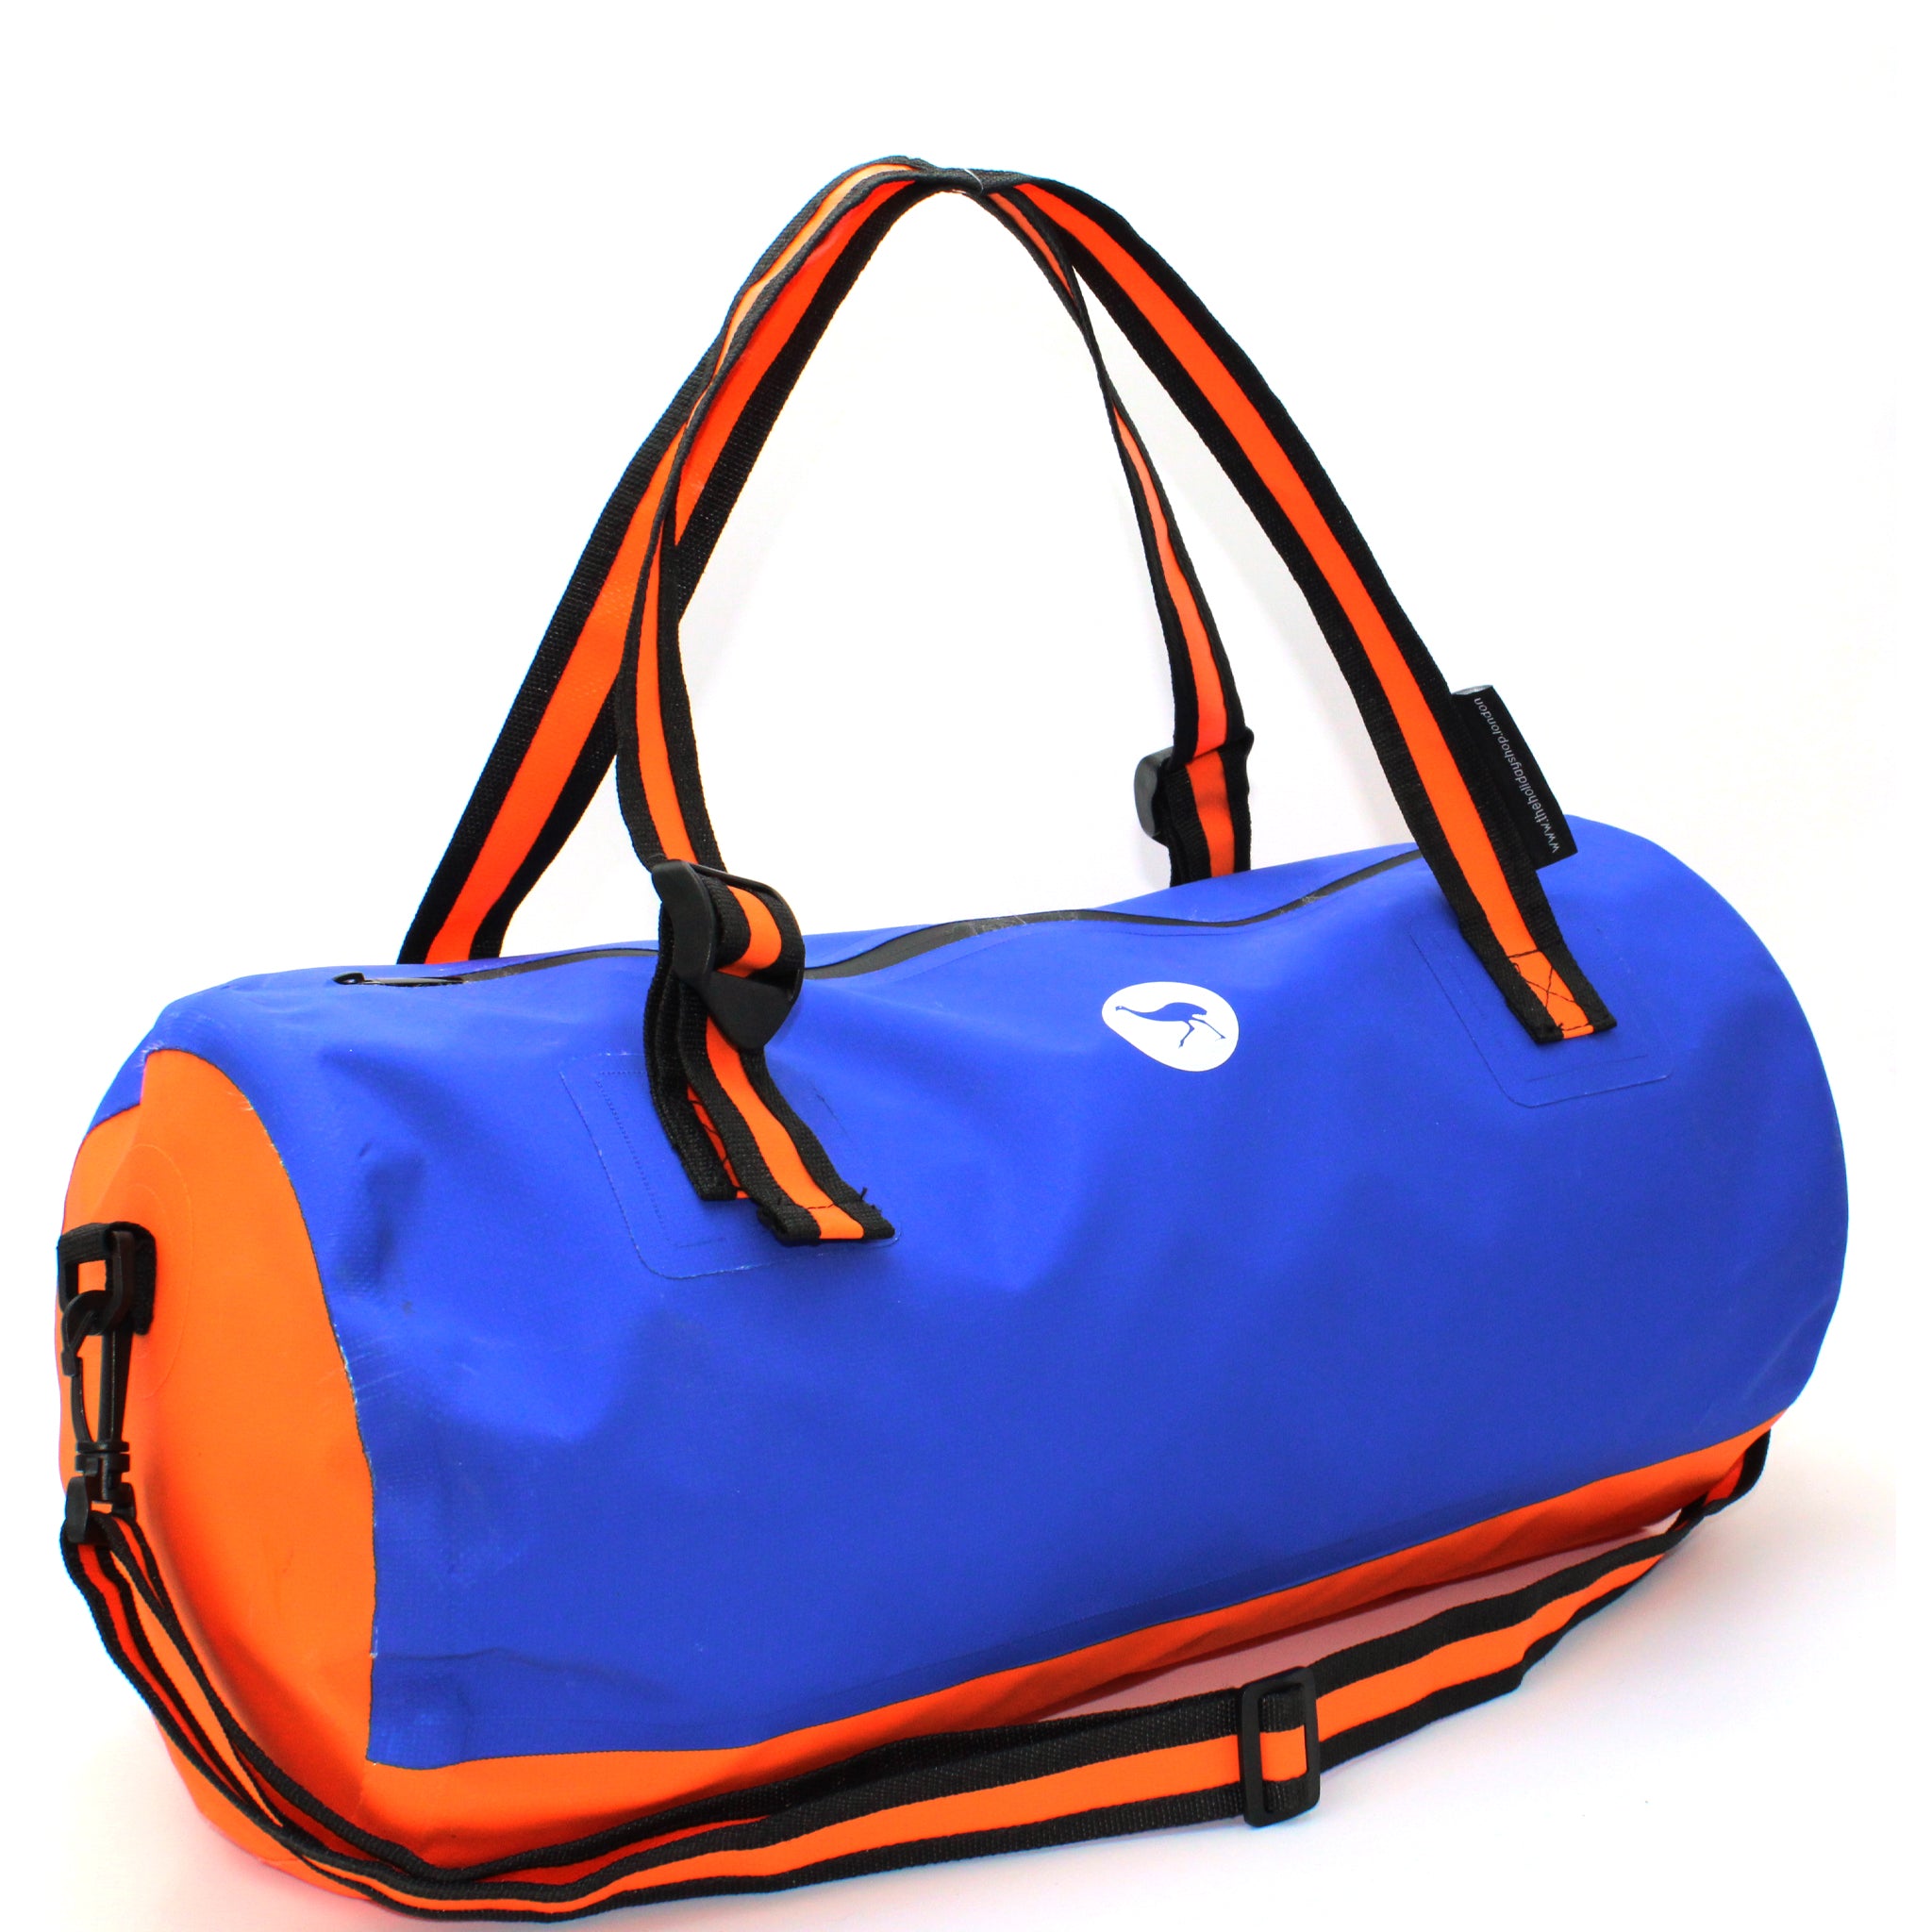 40L Dry Bag Duffel - Red/Turquoise